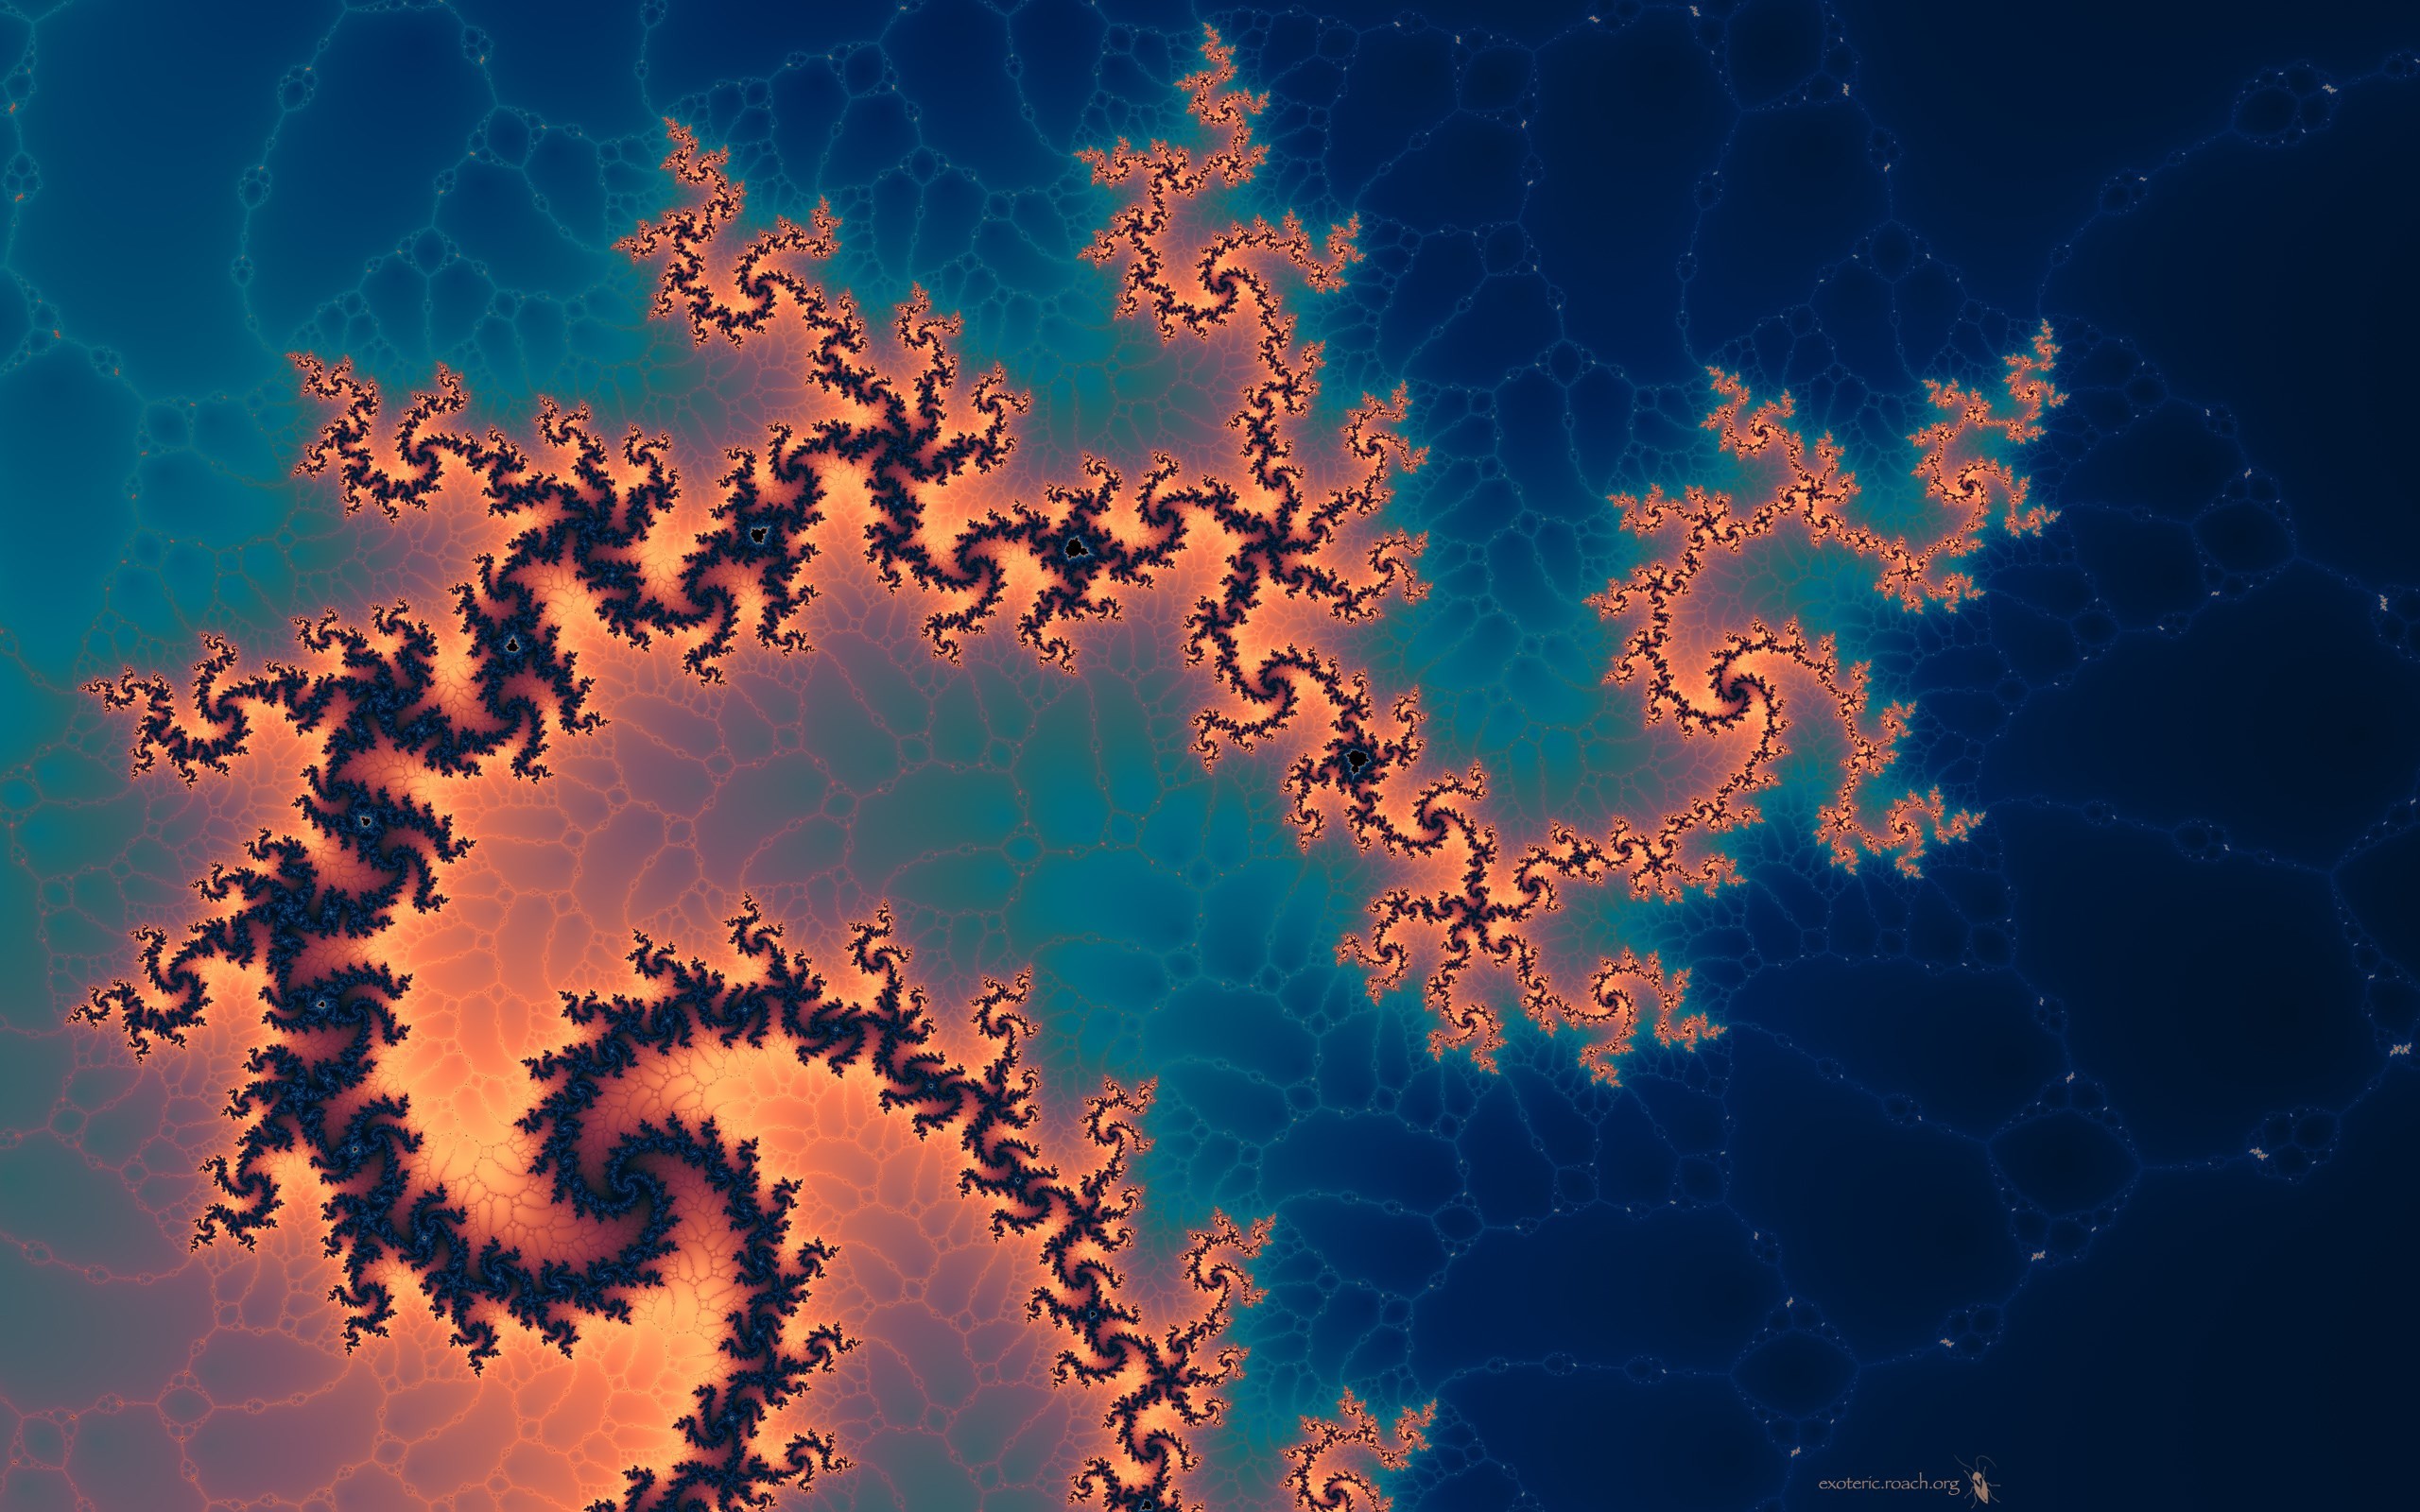 Hd Fractals Wallpapers 1080p 82 Images